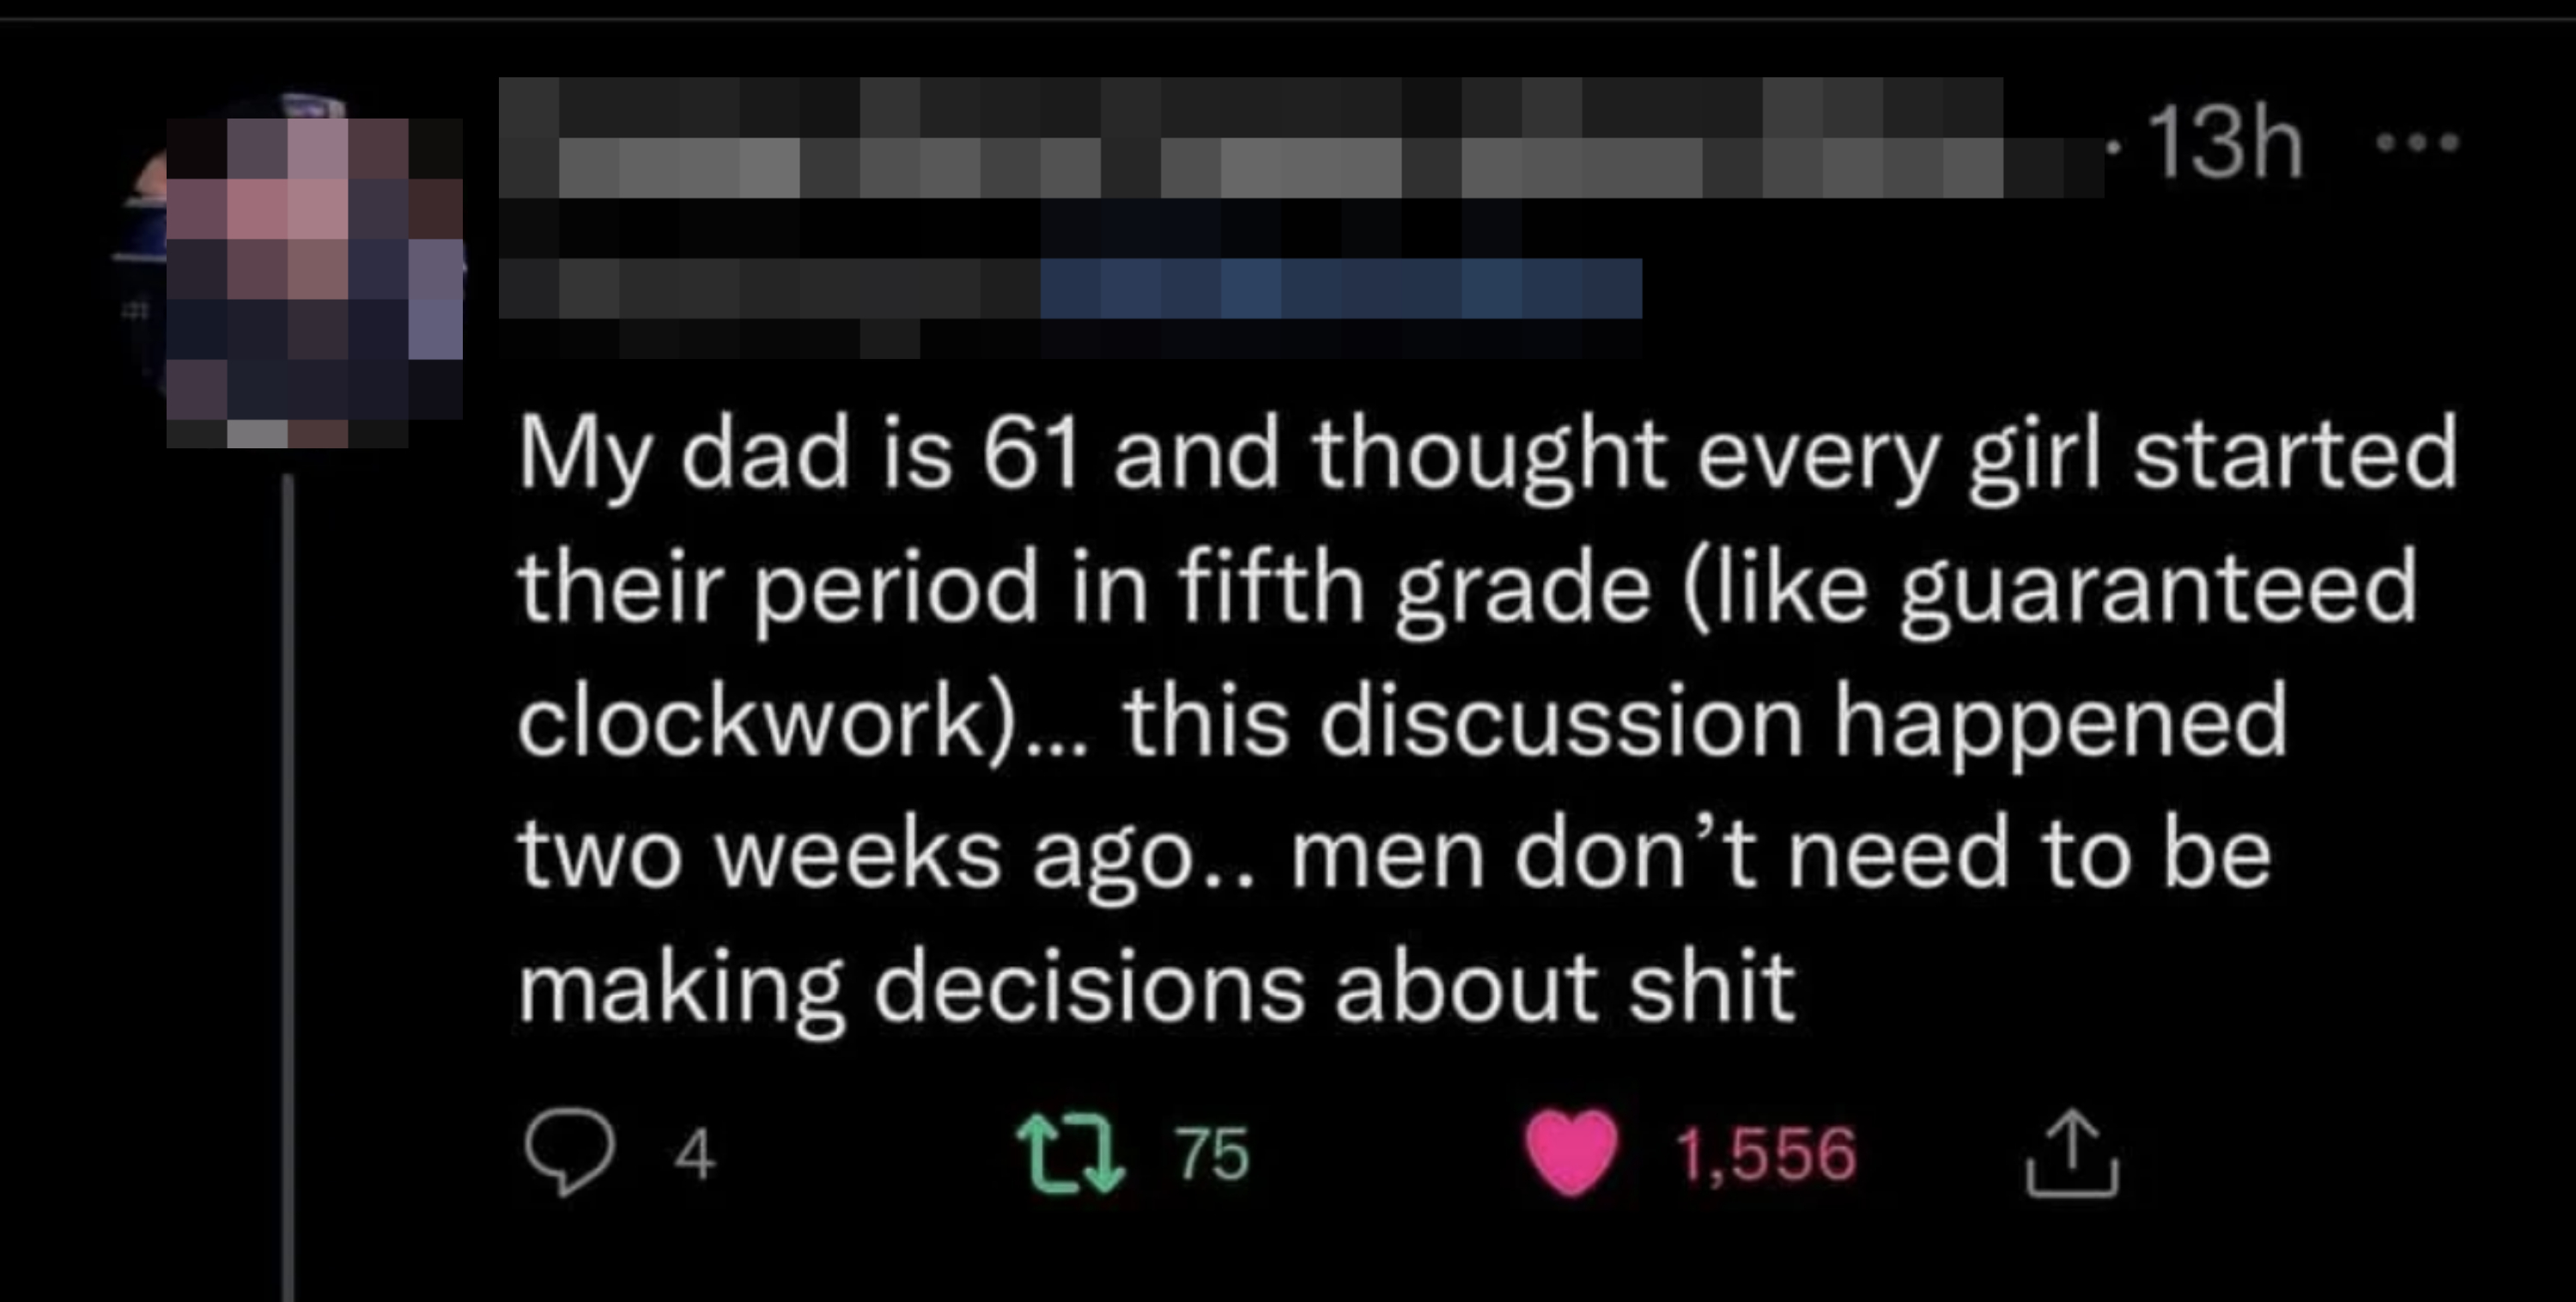 my dad is 61 and thought every girl started their period in 5th grade